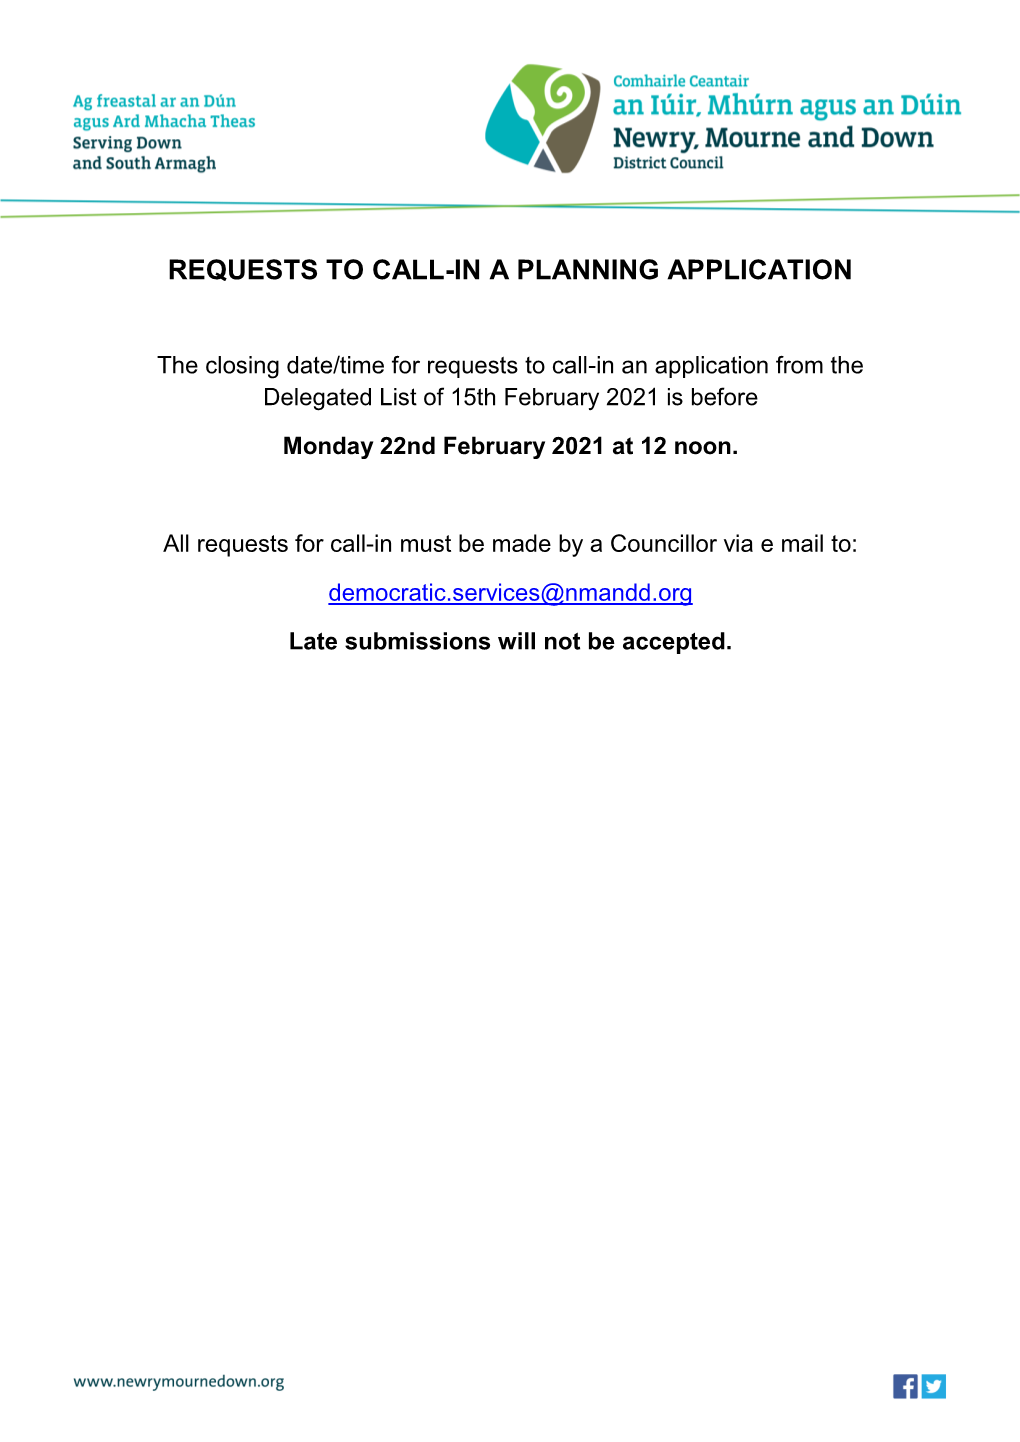 Requests to Call-In a Planning Application